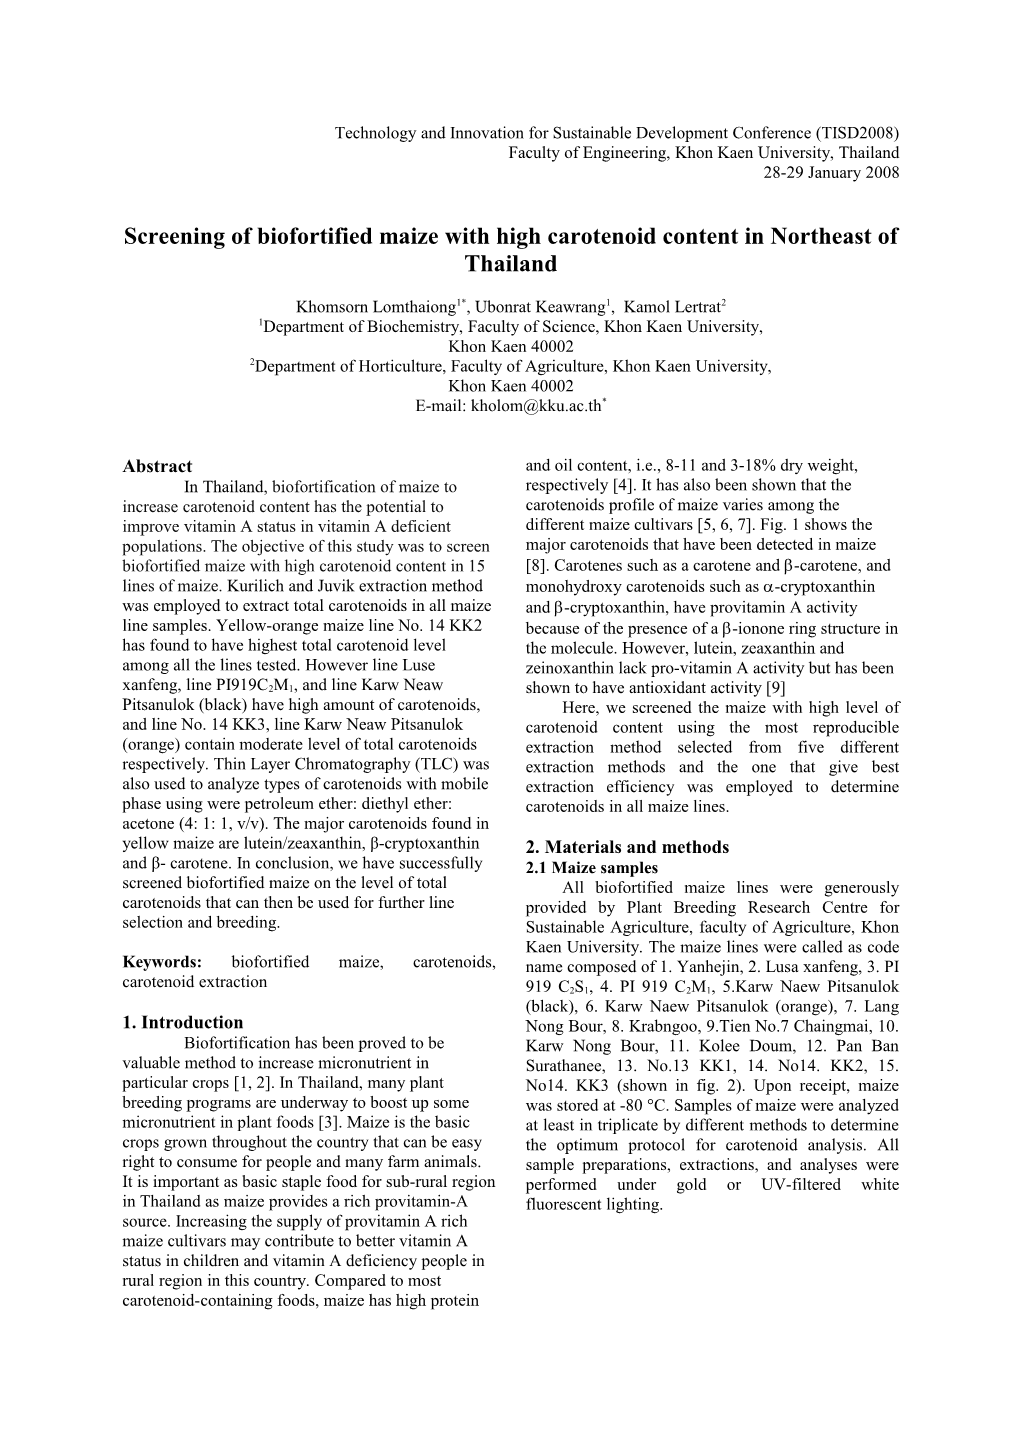 Screening of Biofortified Maize with High Carotenoid Content in Northeast of Thailand